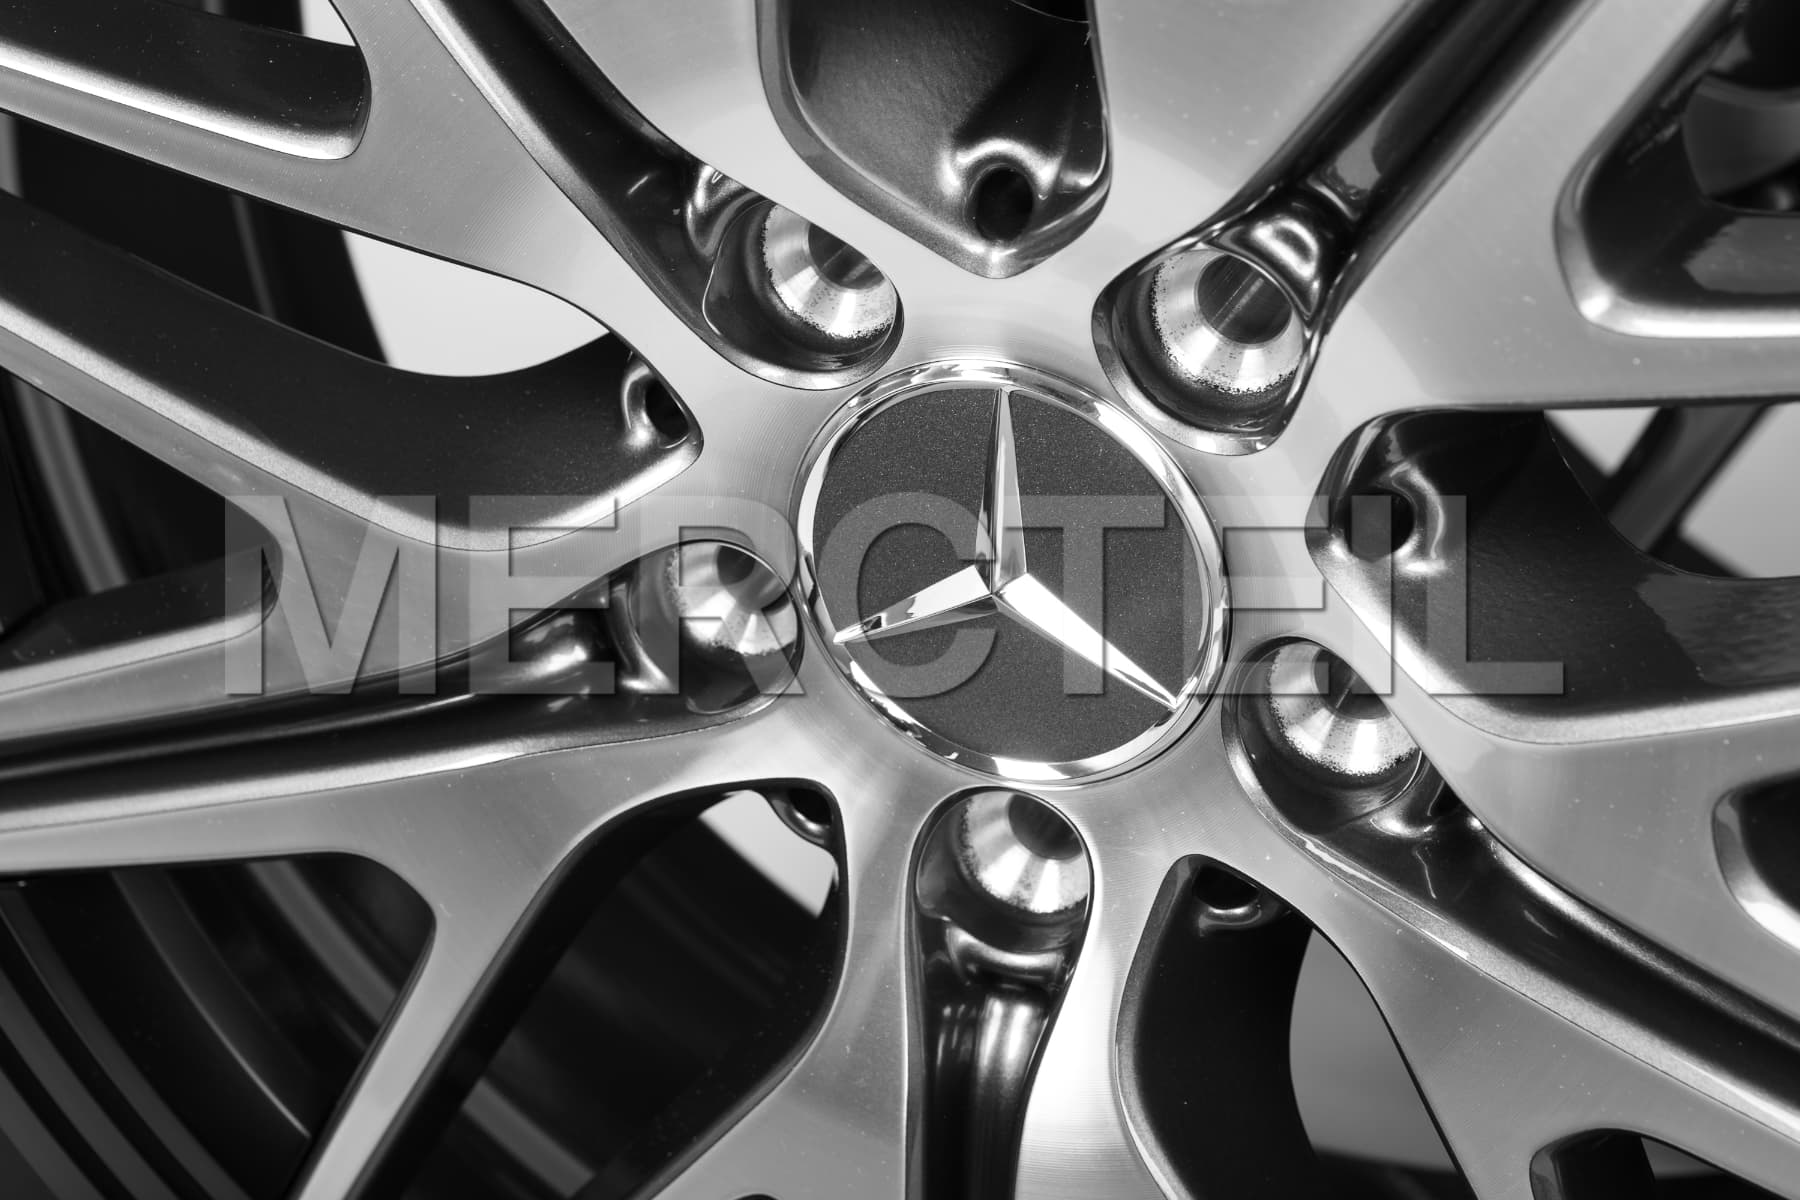 C43 AMG 10 Double Spoke Alloy Wheels R20 W/S206 Genuine Mercedes-AMG (Part number: A2064000200)